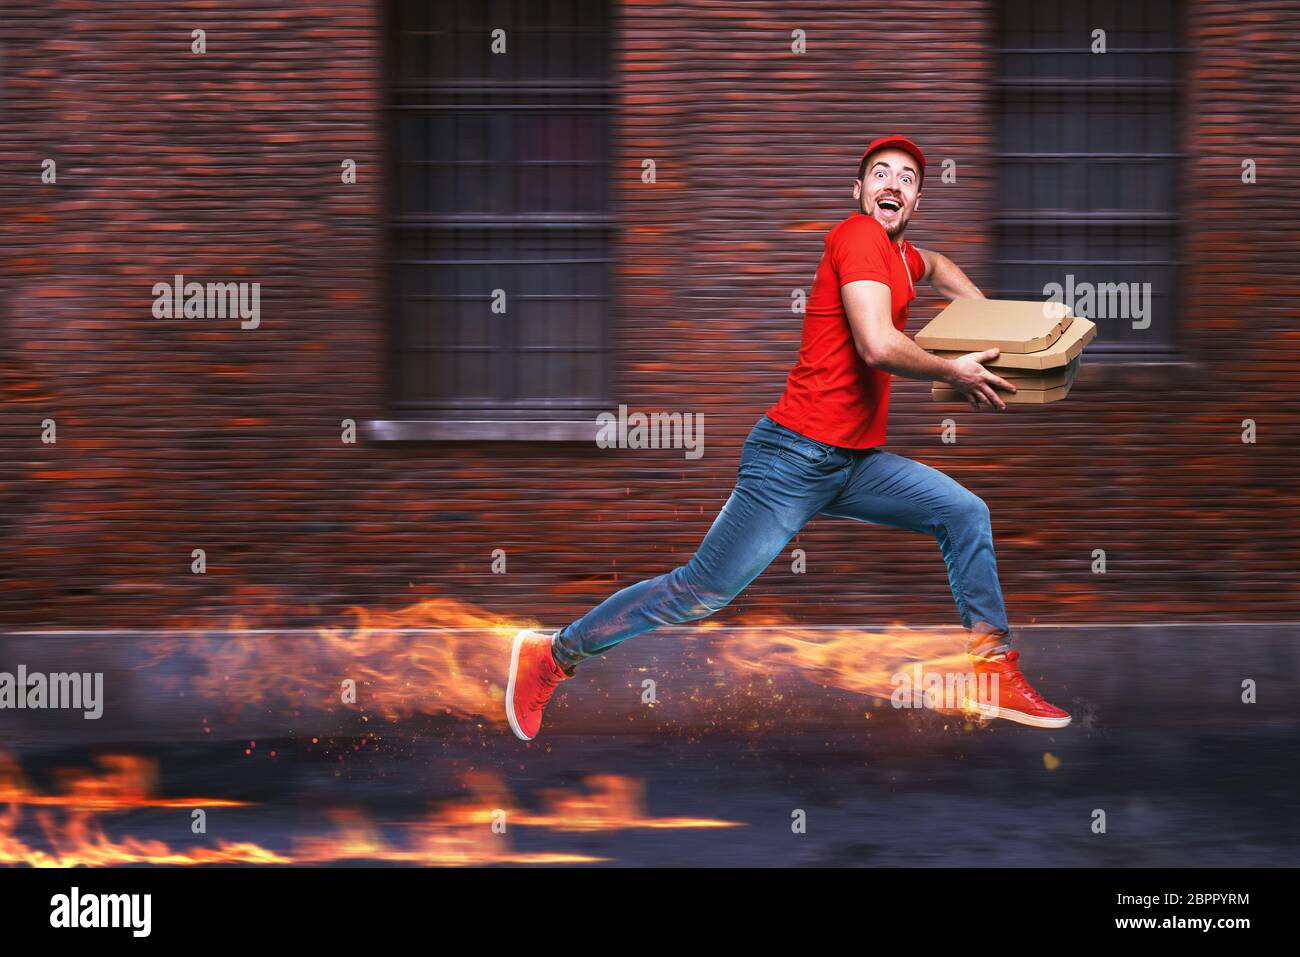 Courier runs fast to deliver quickly pizzas with fiery feet. Cyan background Stock Photo